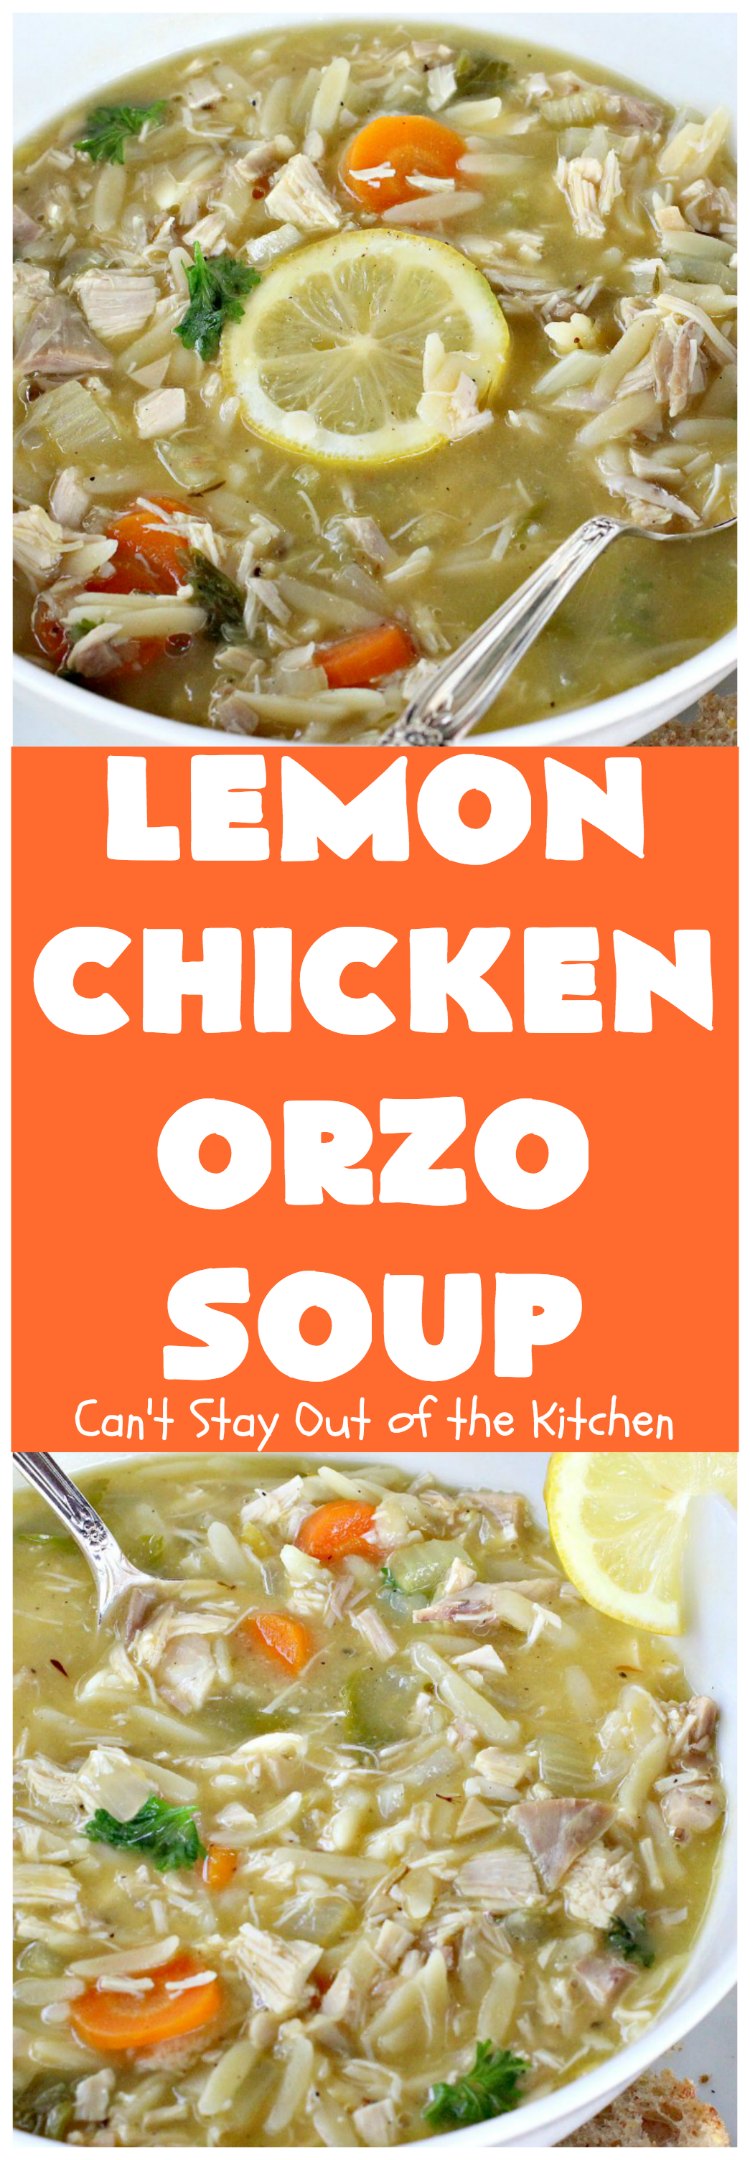 Lemon Chicken Orzo Soup | Can't Stay Out of the Kitchen